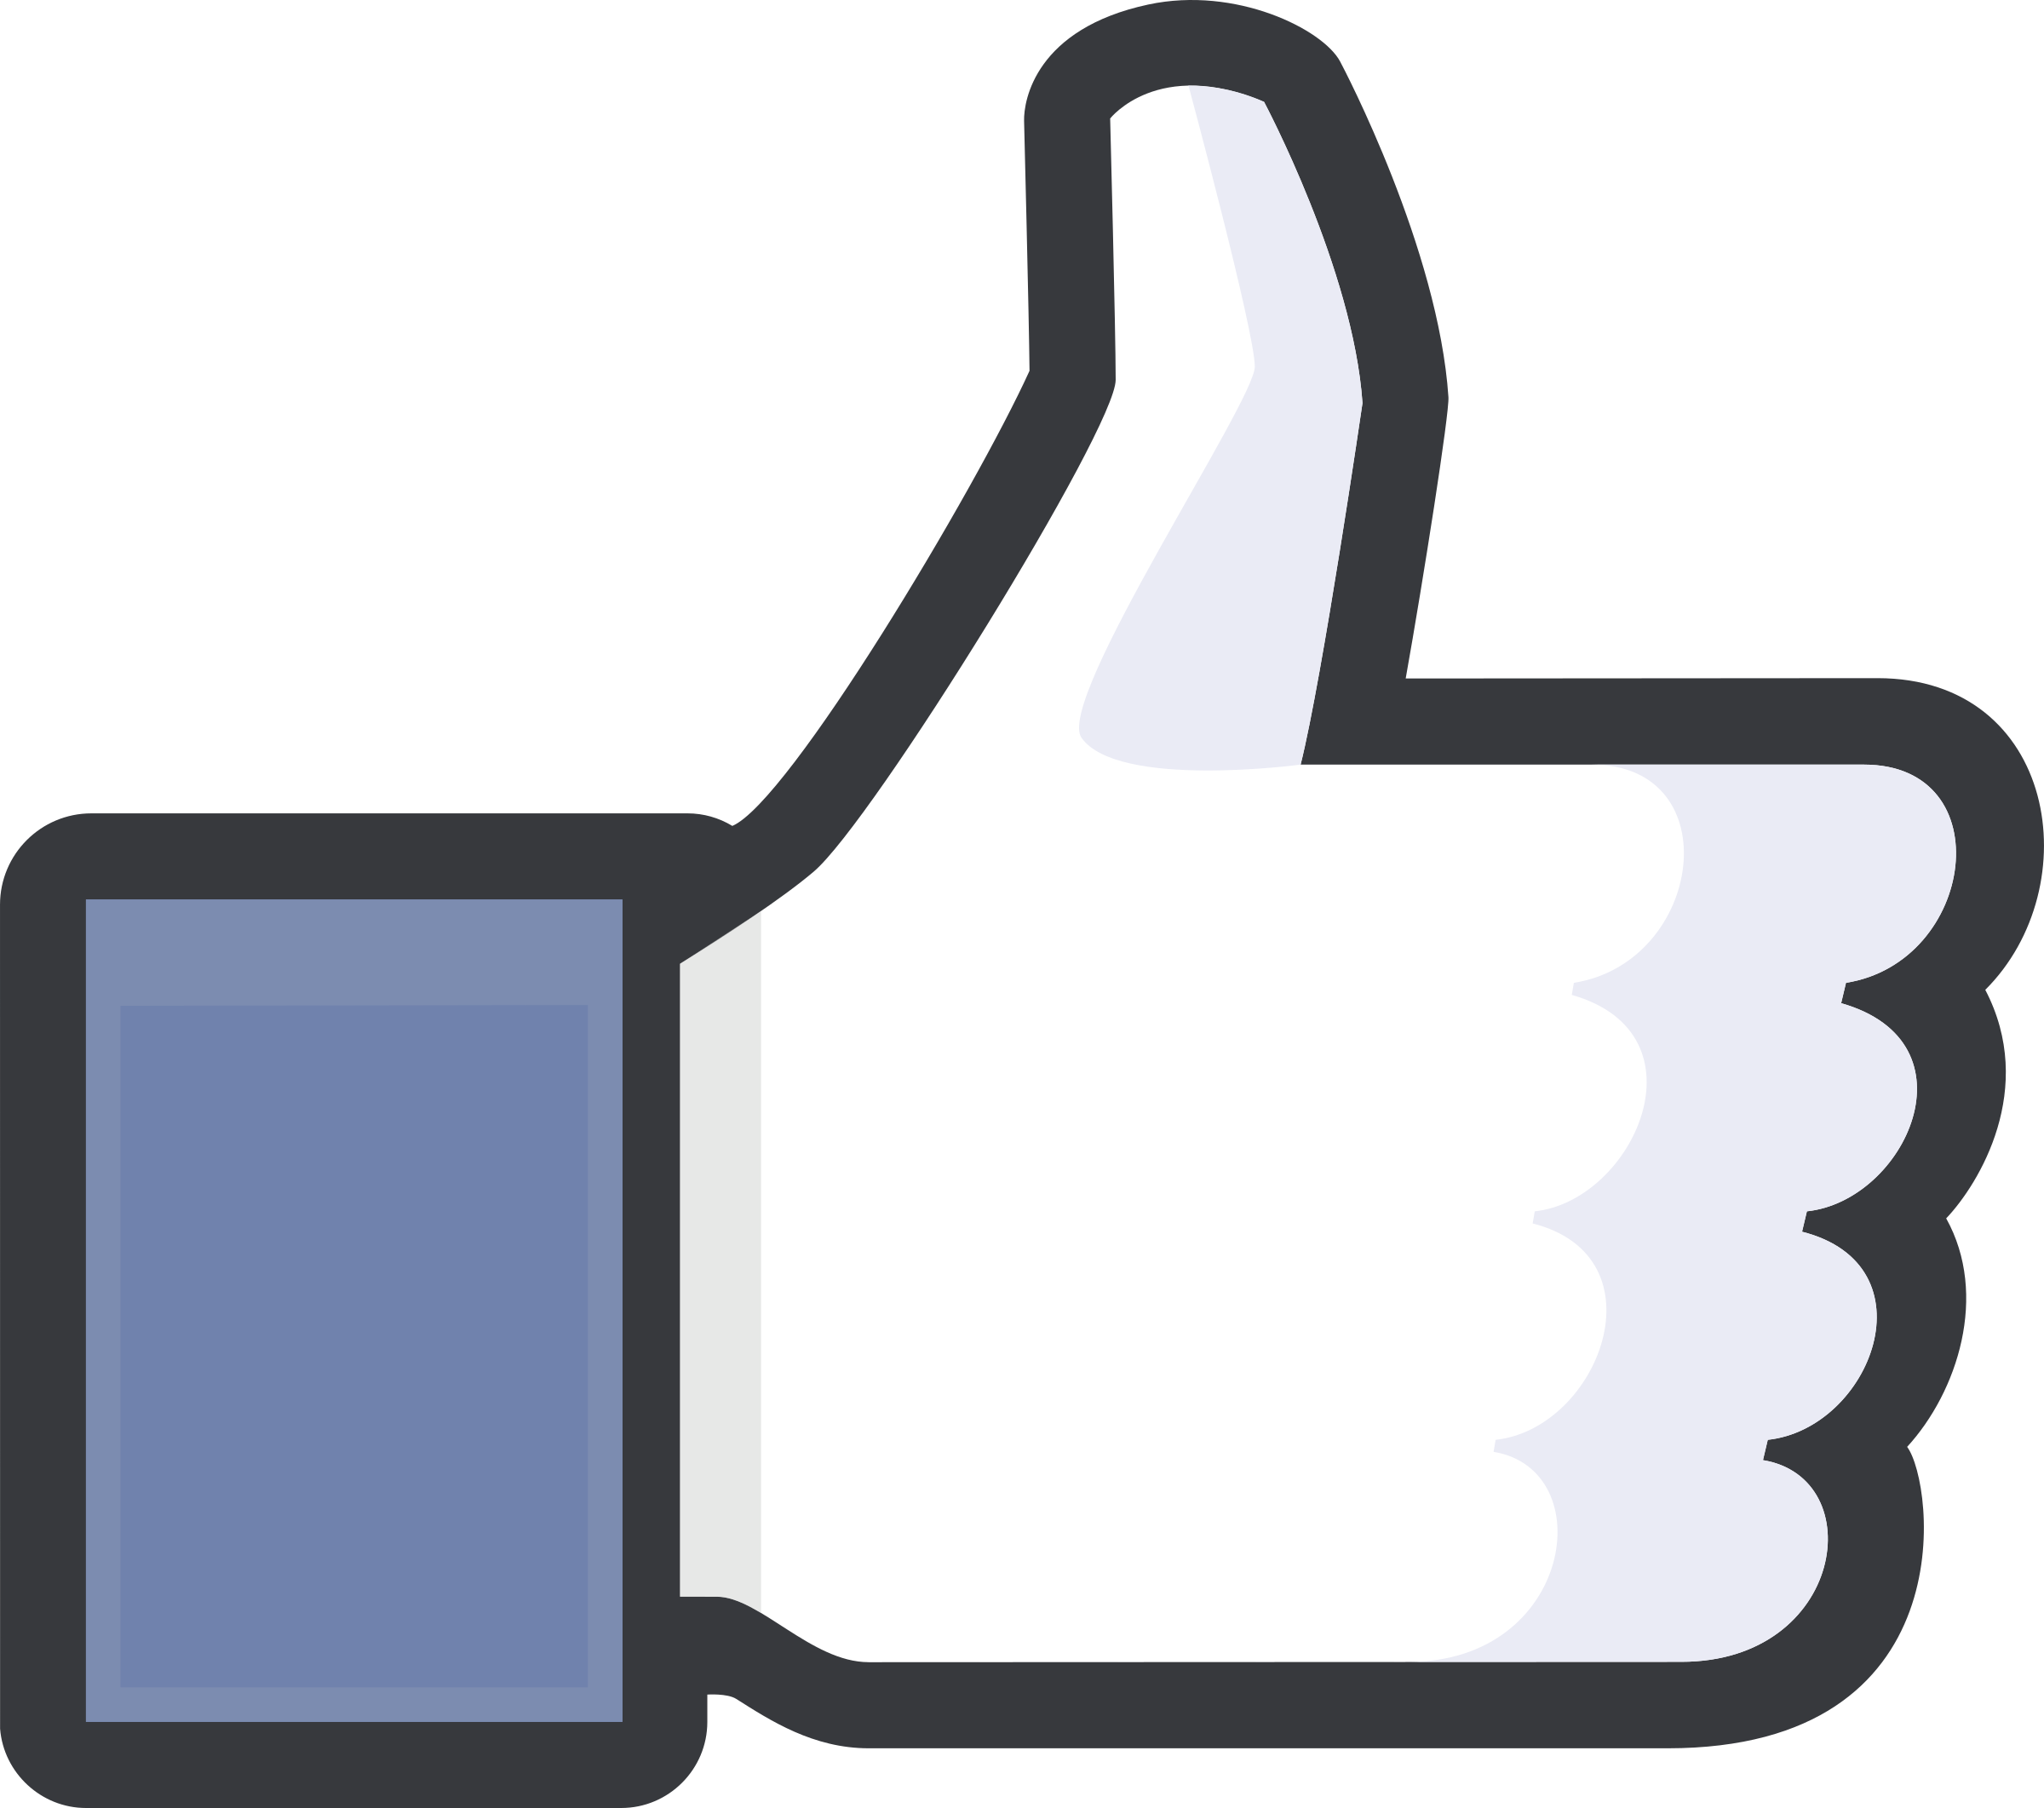 thumbs up PNG transparent image download, size: 2198x2519px